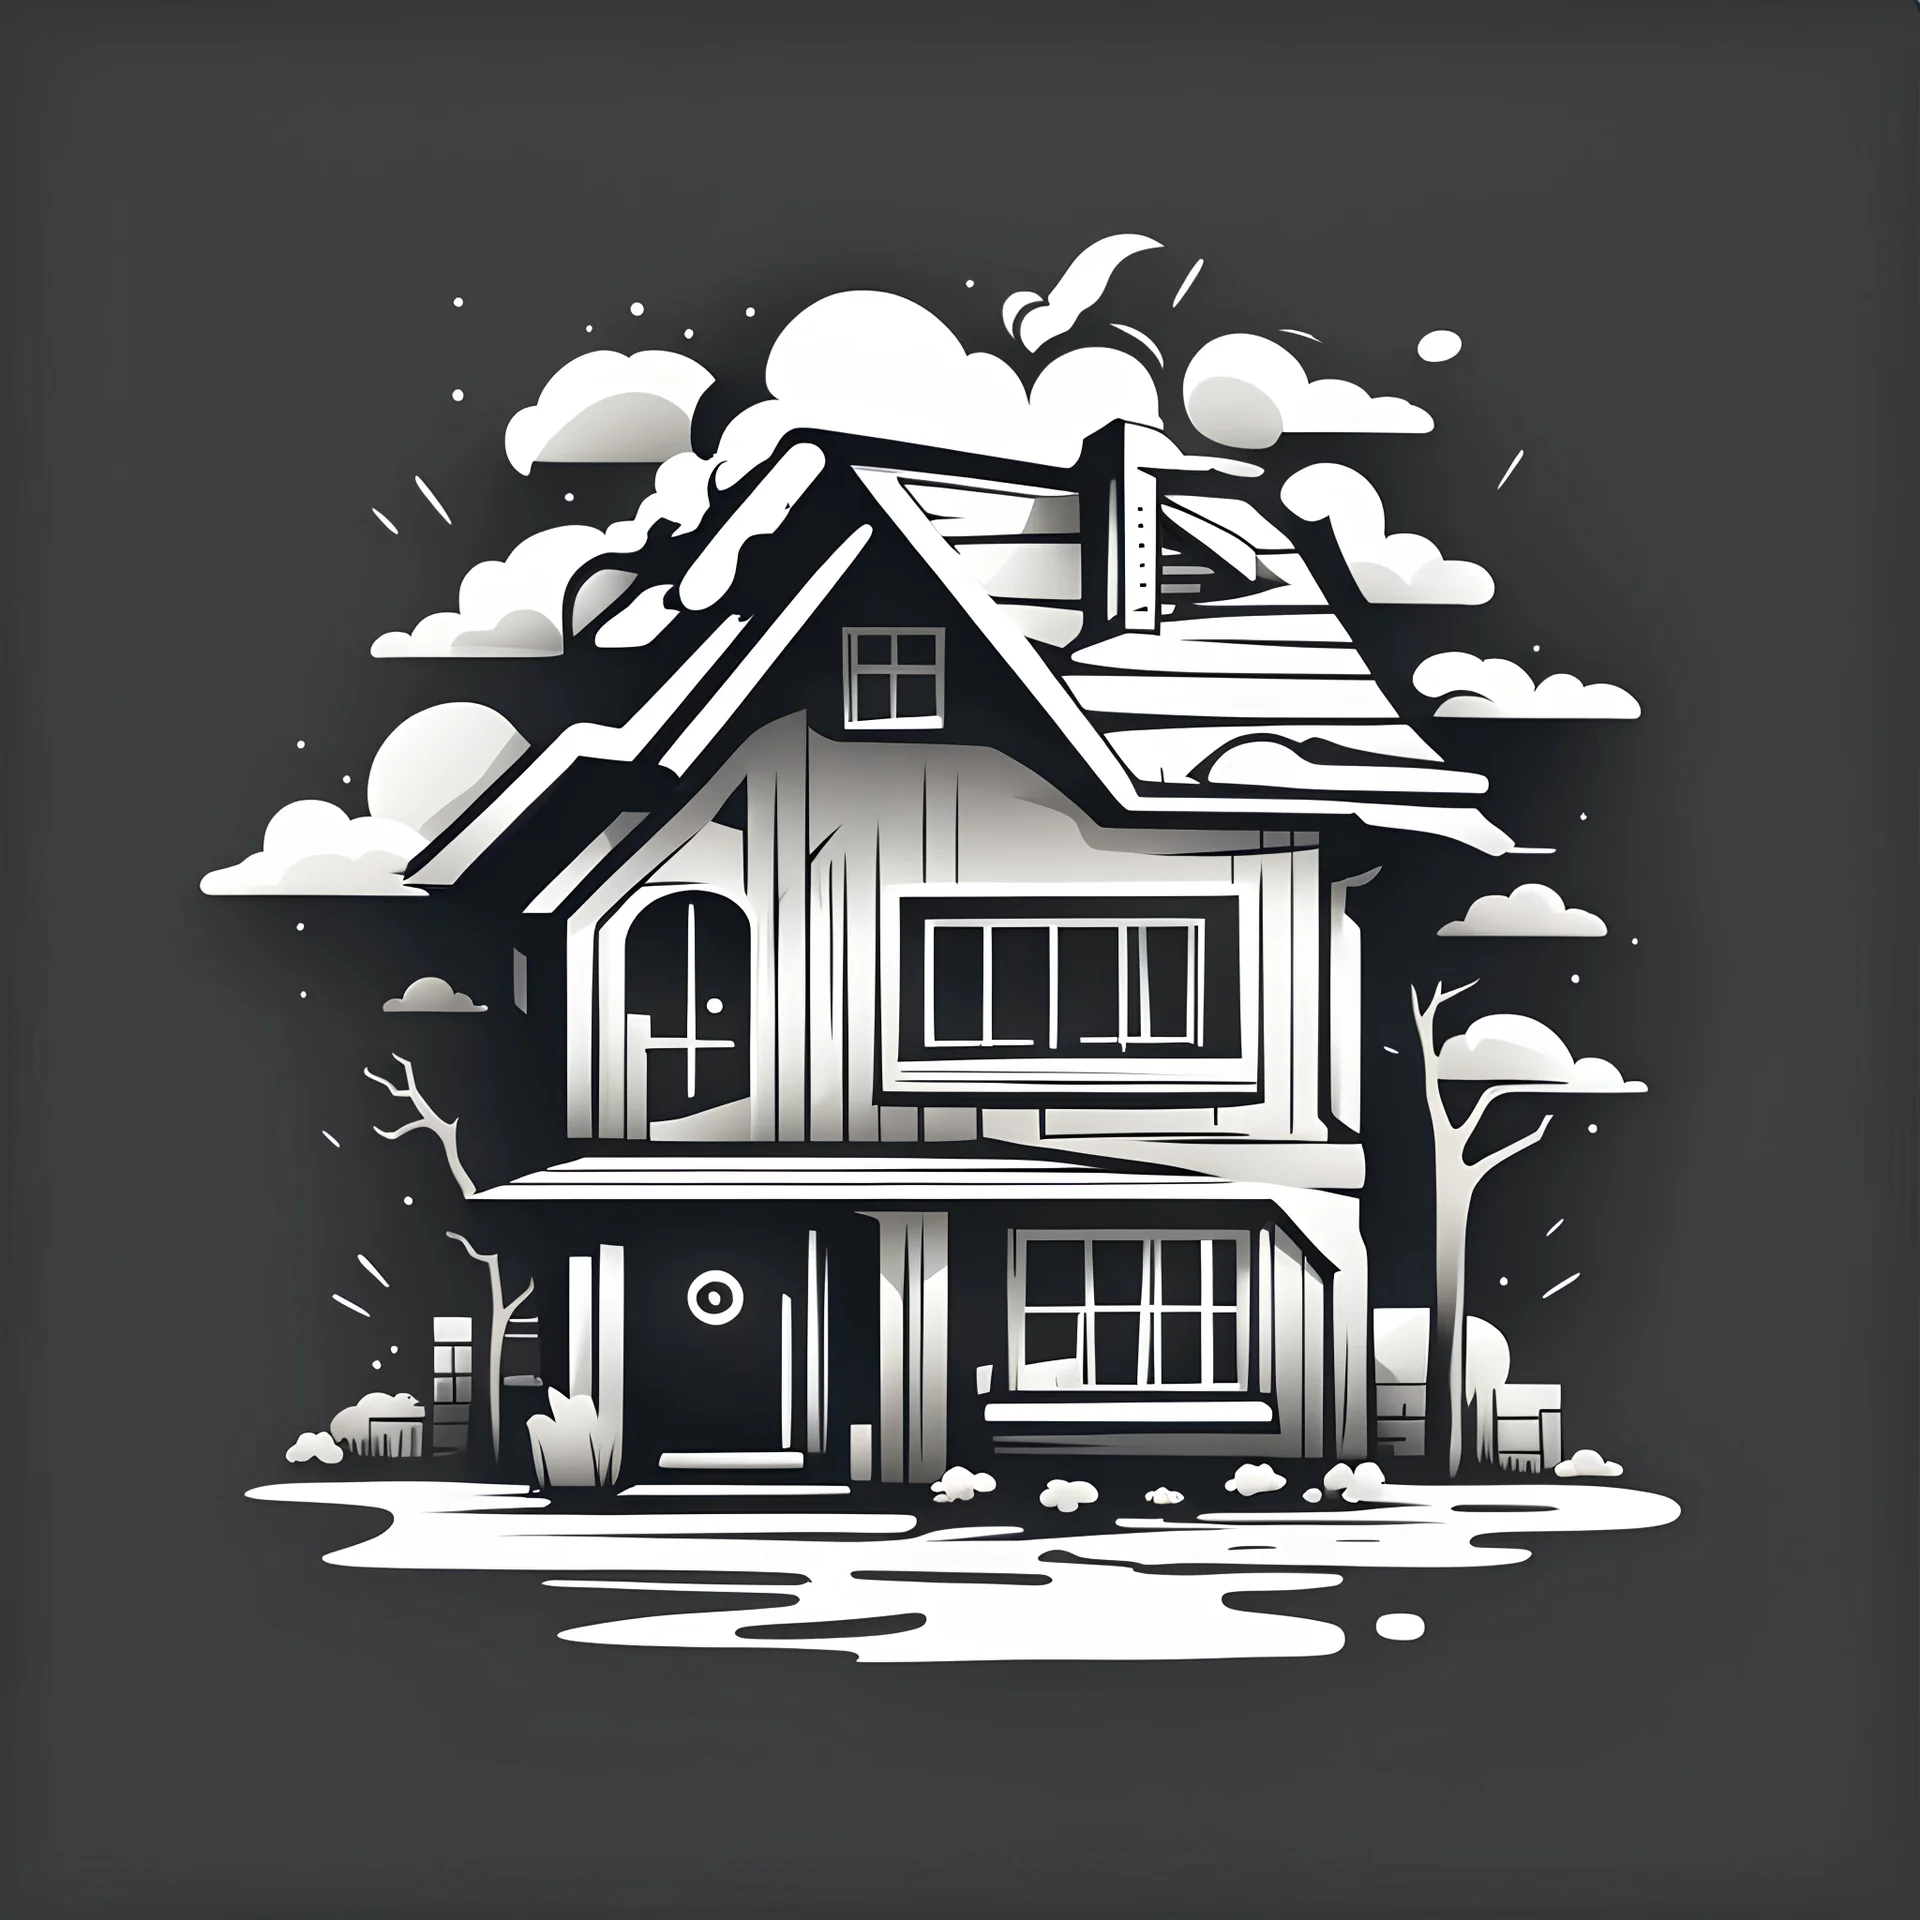 post-apocalyptic cozy house vector icon in white color over the back background, stylized